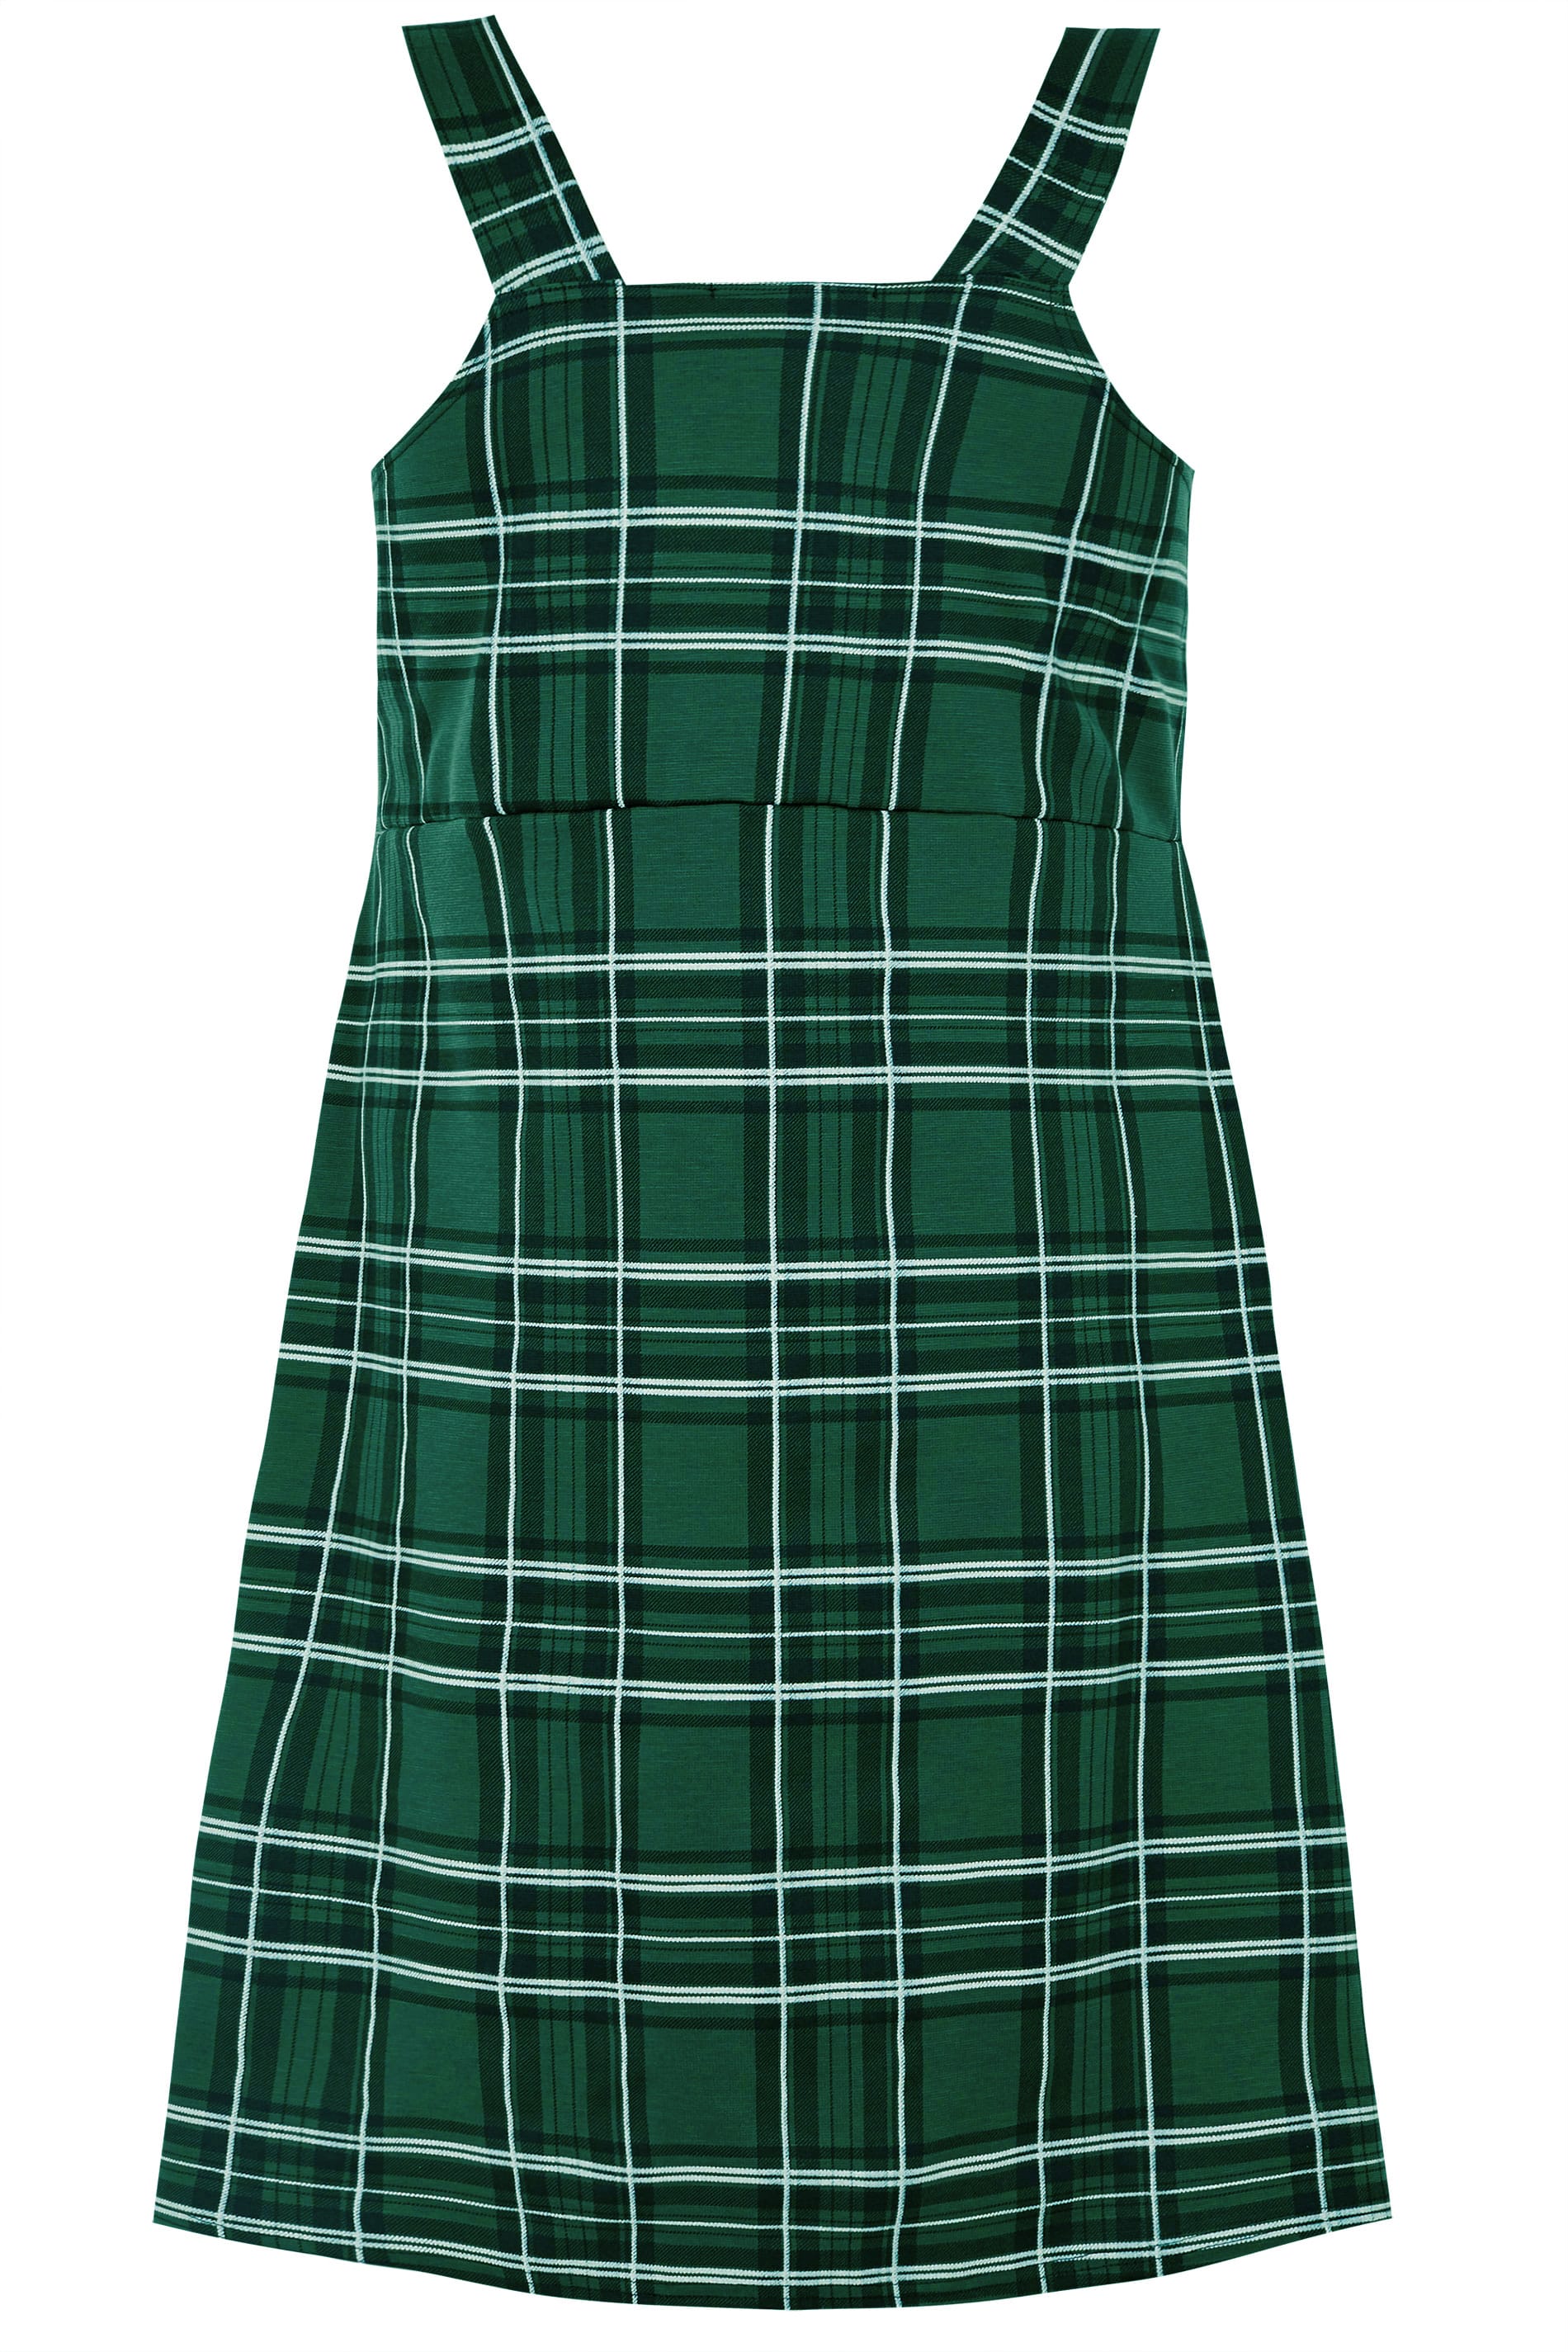 Plus Size Dark Green Check Pinafore Dress | Sizes 16 to 36 | Yours Clothing